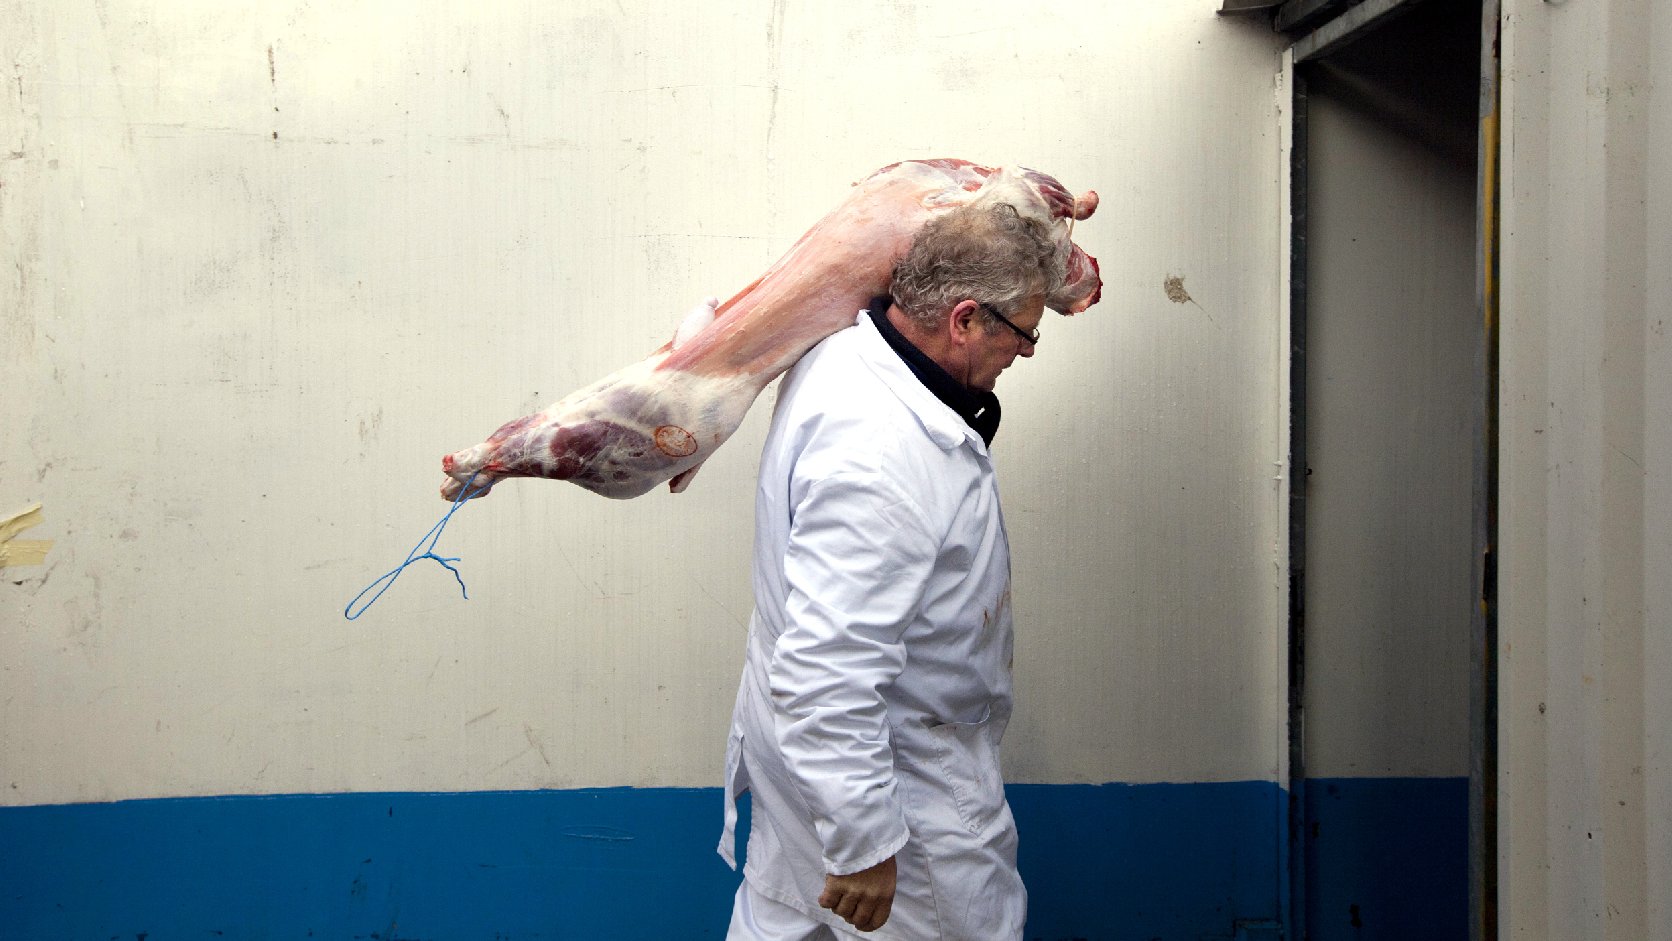 Ritually slaughtered lamb is delivered at a halal butcher shop in The Hague, Netherlands, in 2011. Denmark, Sweden and Norway are among the countries requiring animals to be stunned before slaughter. Dutch lawmakers took up the issue in 2012. Photo: Peter Dejong/AP